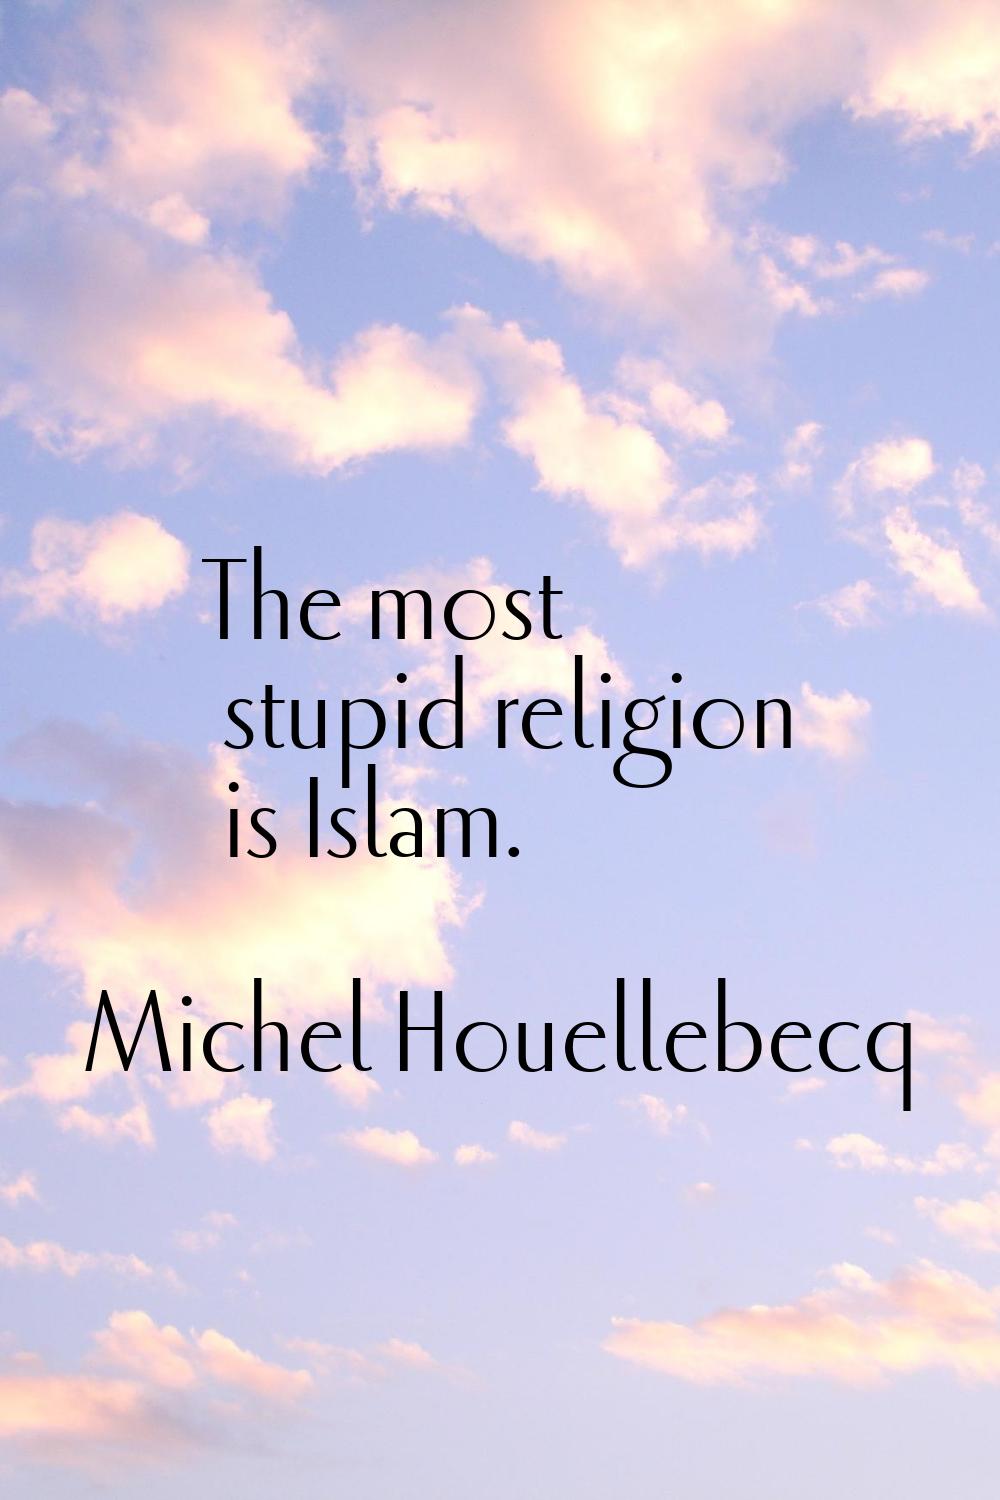 The most stupid religion is Islam.